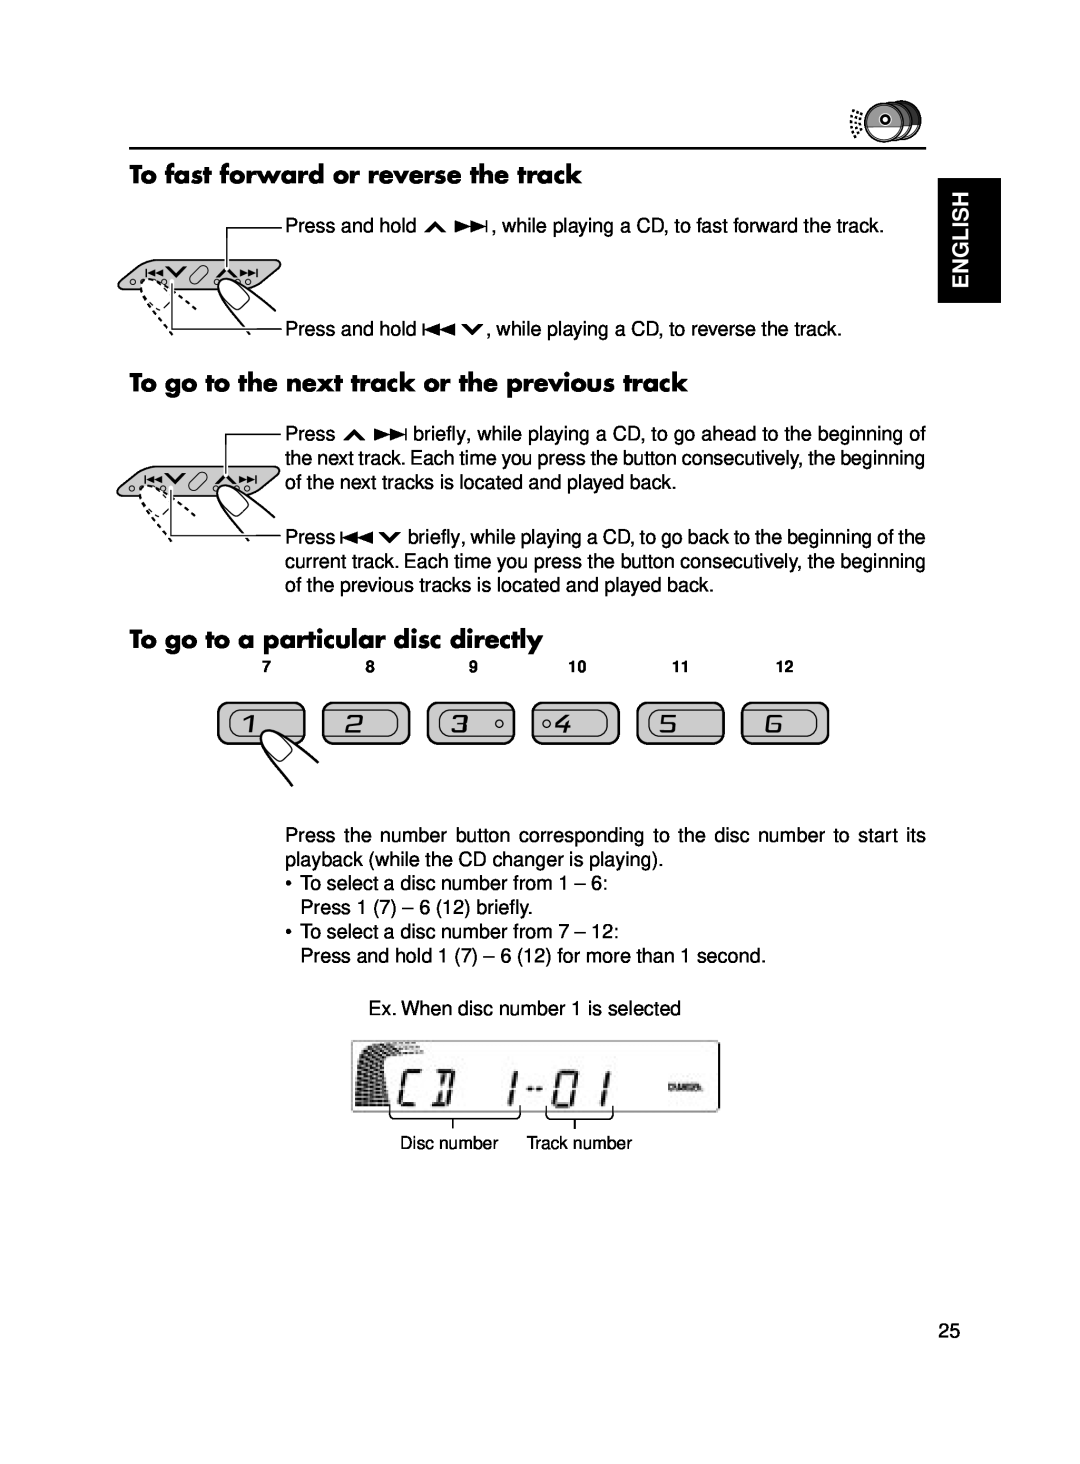 JVC KD-SX650 manual To go to a particular disc directly, To fast forward or reverse the track, English 